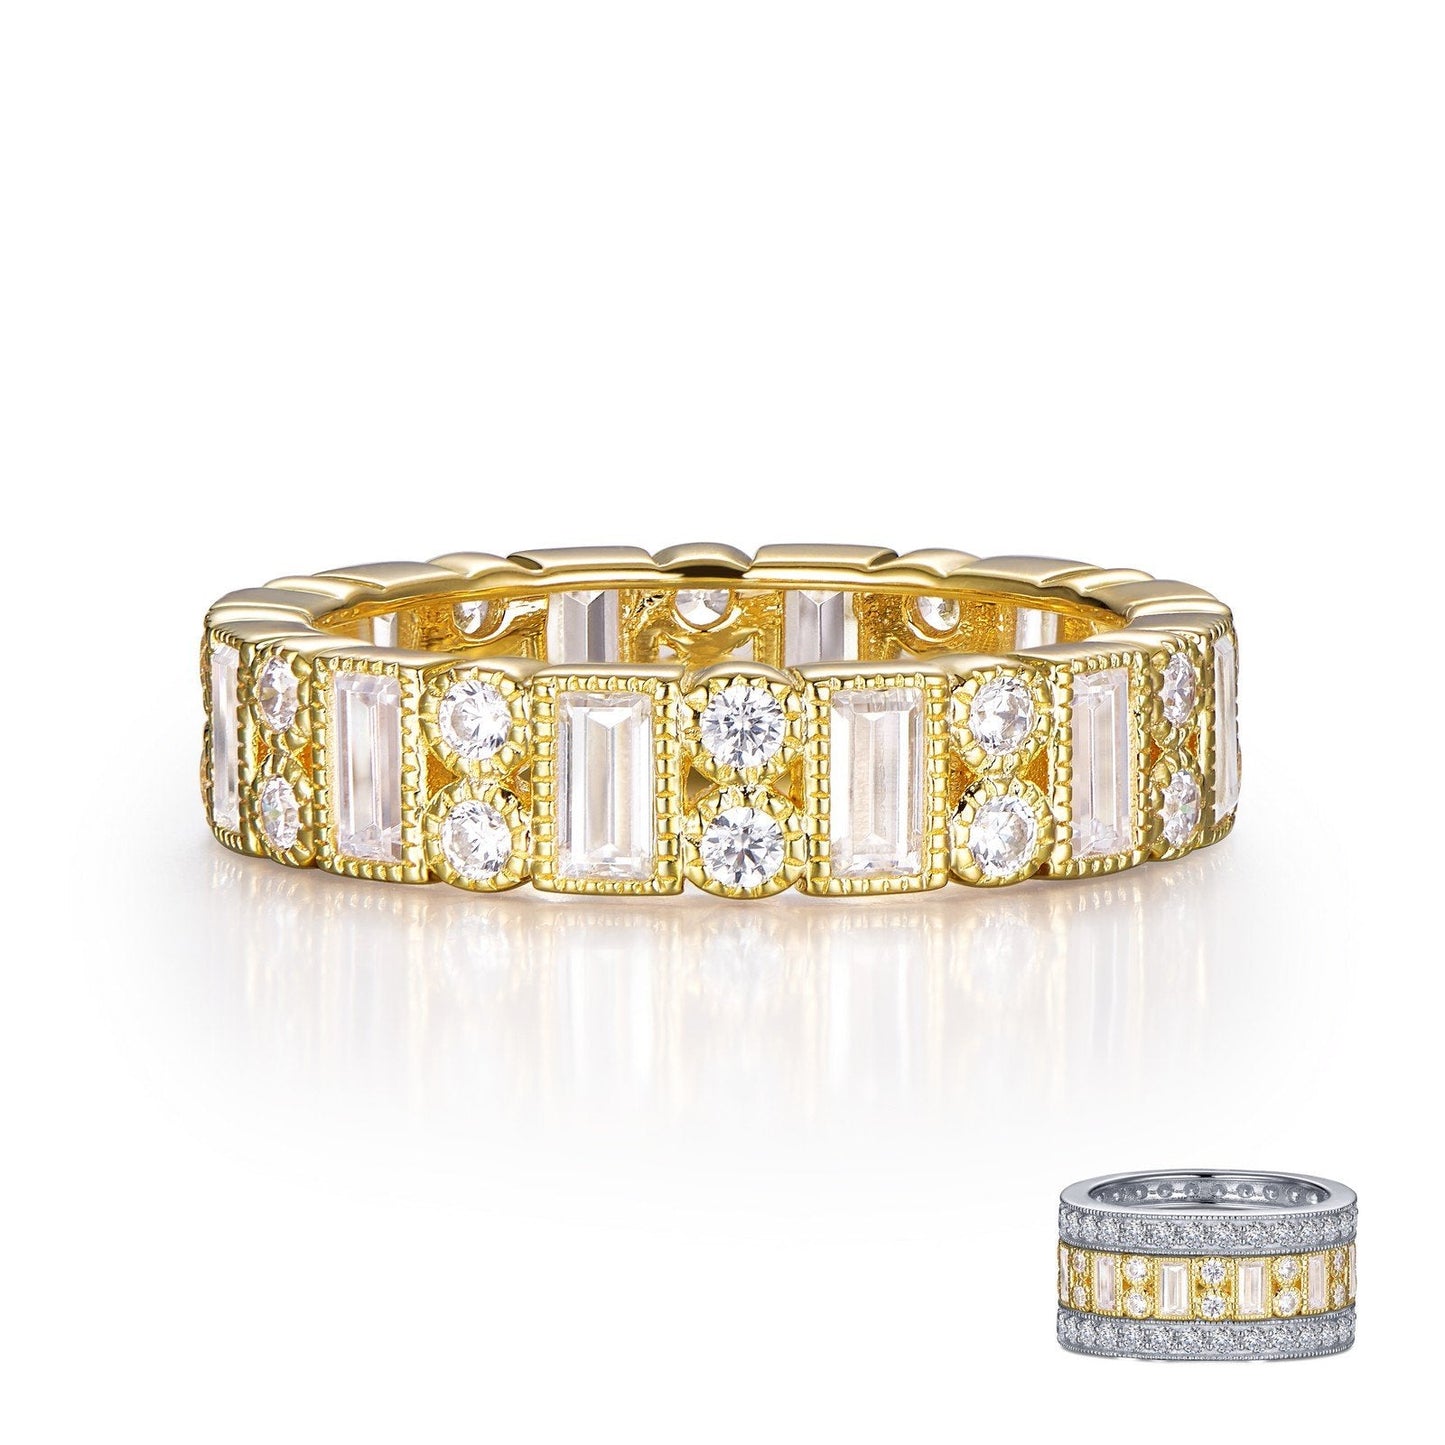 Load image into Gallery viewer, Lafonn Alternating Eternity Band Simulated Diamond RINGS Size 10 Gold 1.68 CTS 4.9mm(W)
